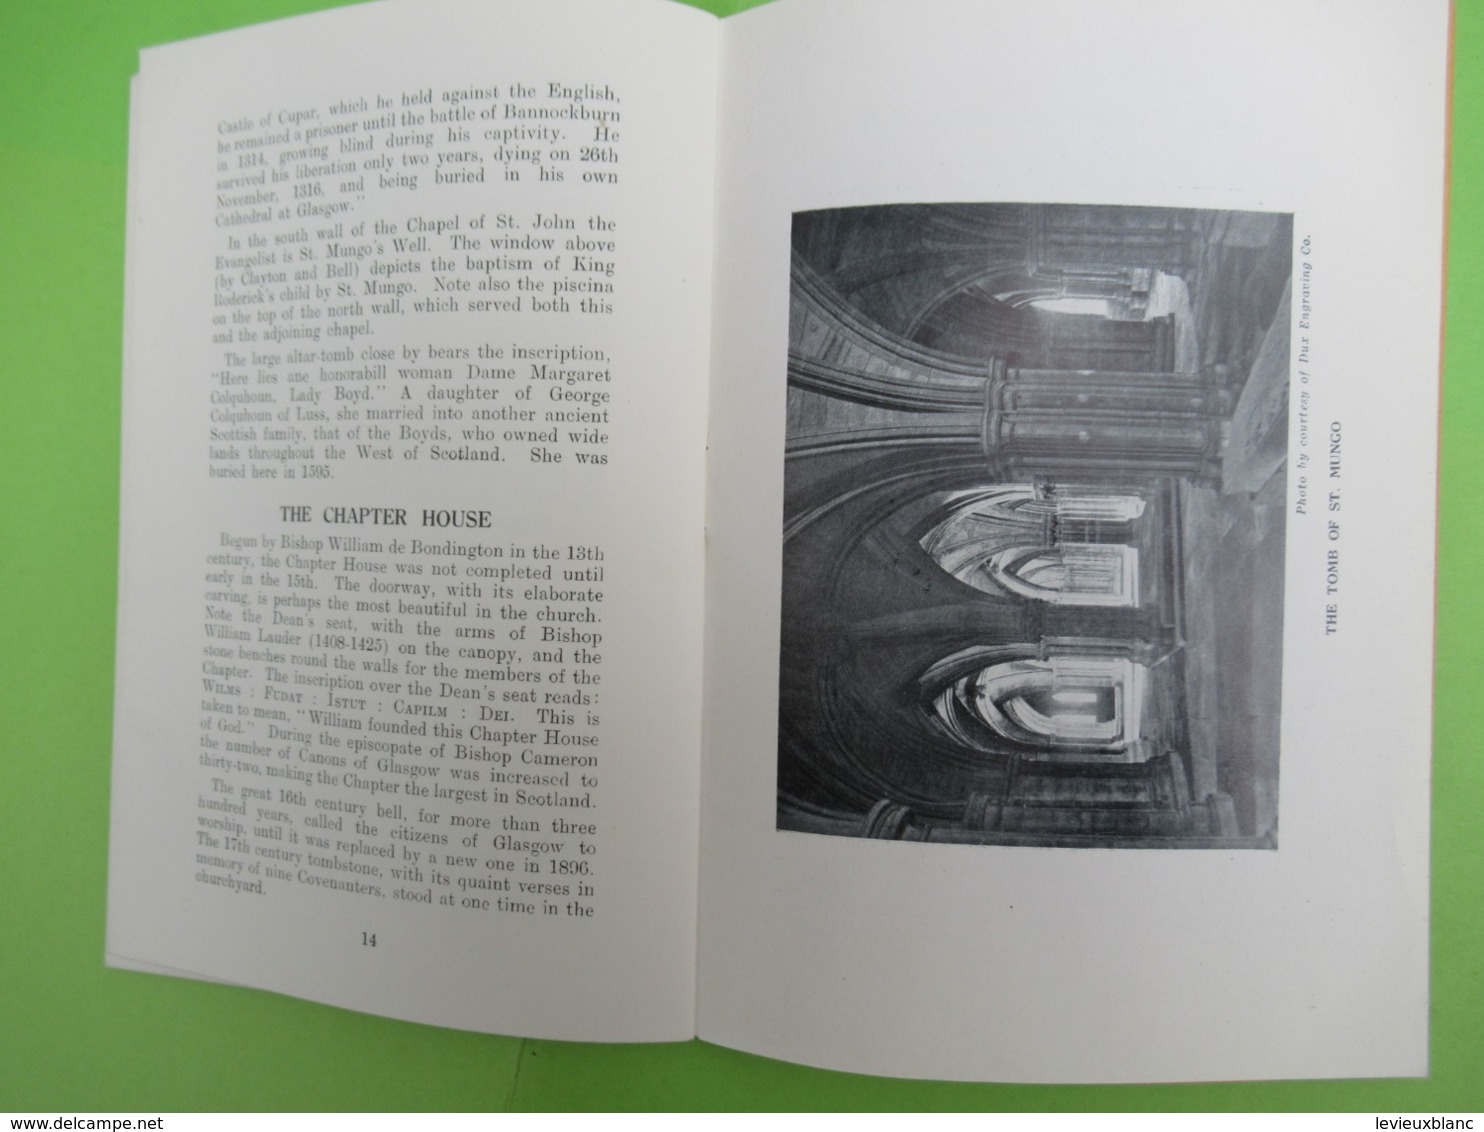 Guide Historique/A short history and guide/GLASGOW CATHEDRAL/A Nevile Davidson/Minister of glasgow/1938          PGC383